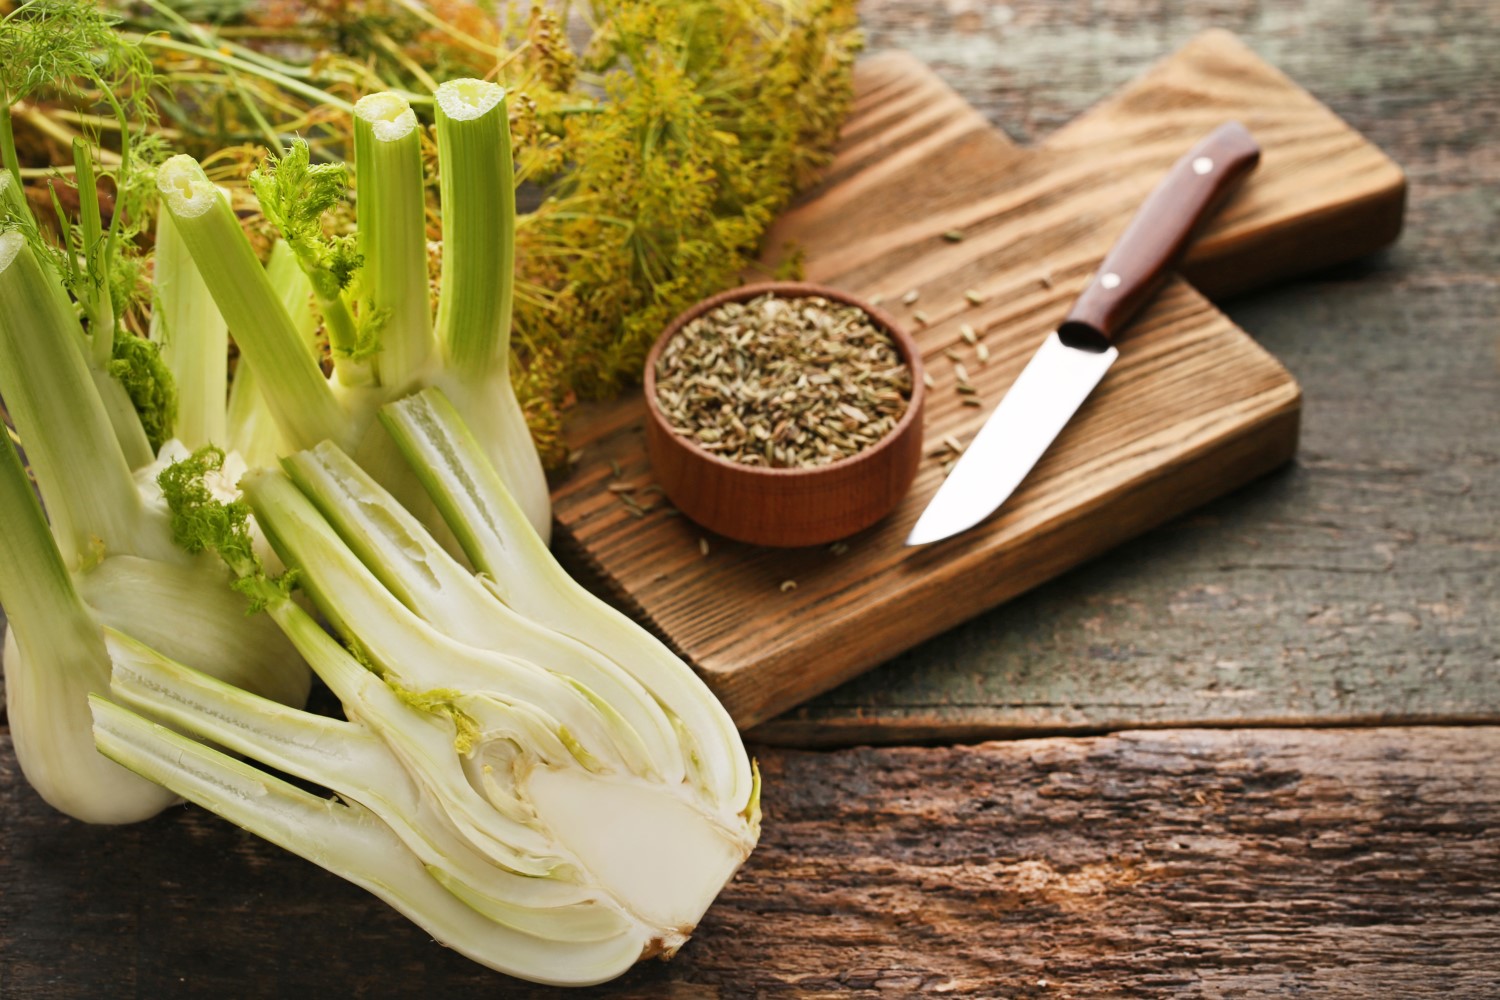 Fennel used for cooking